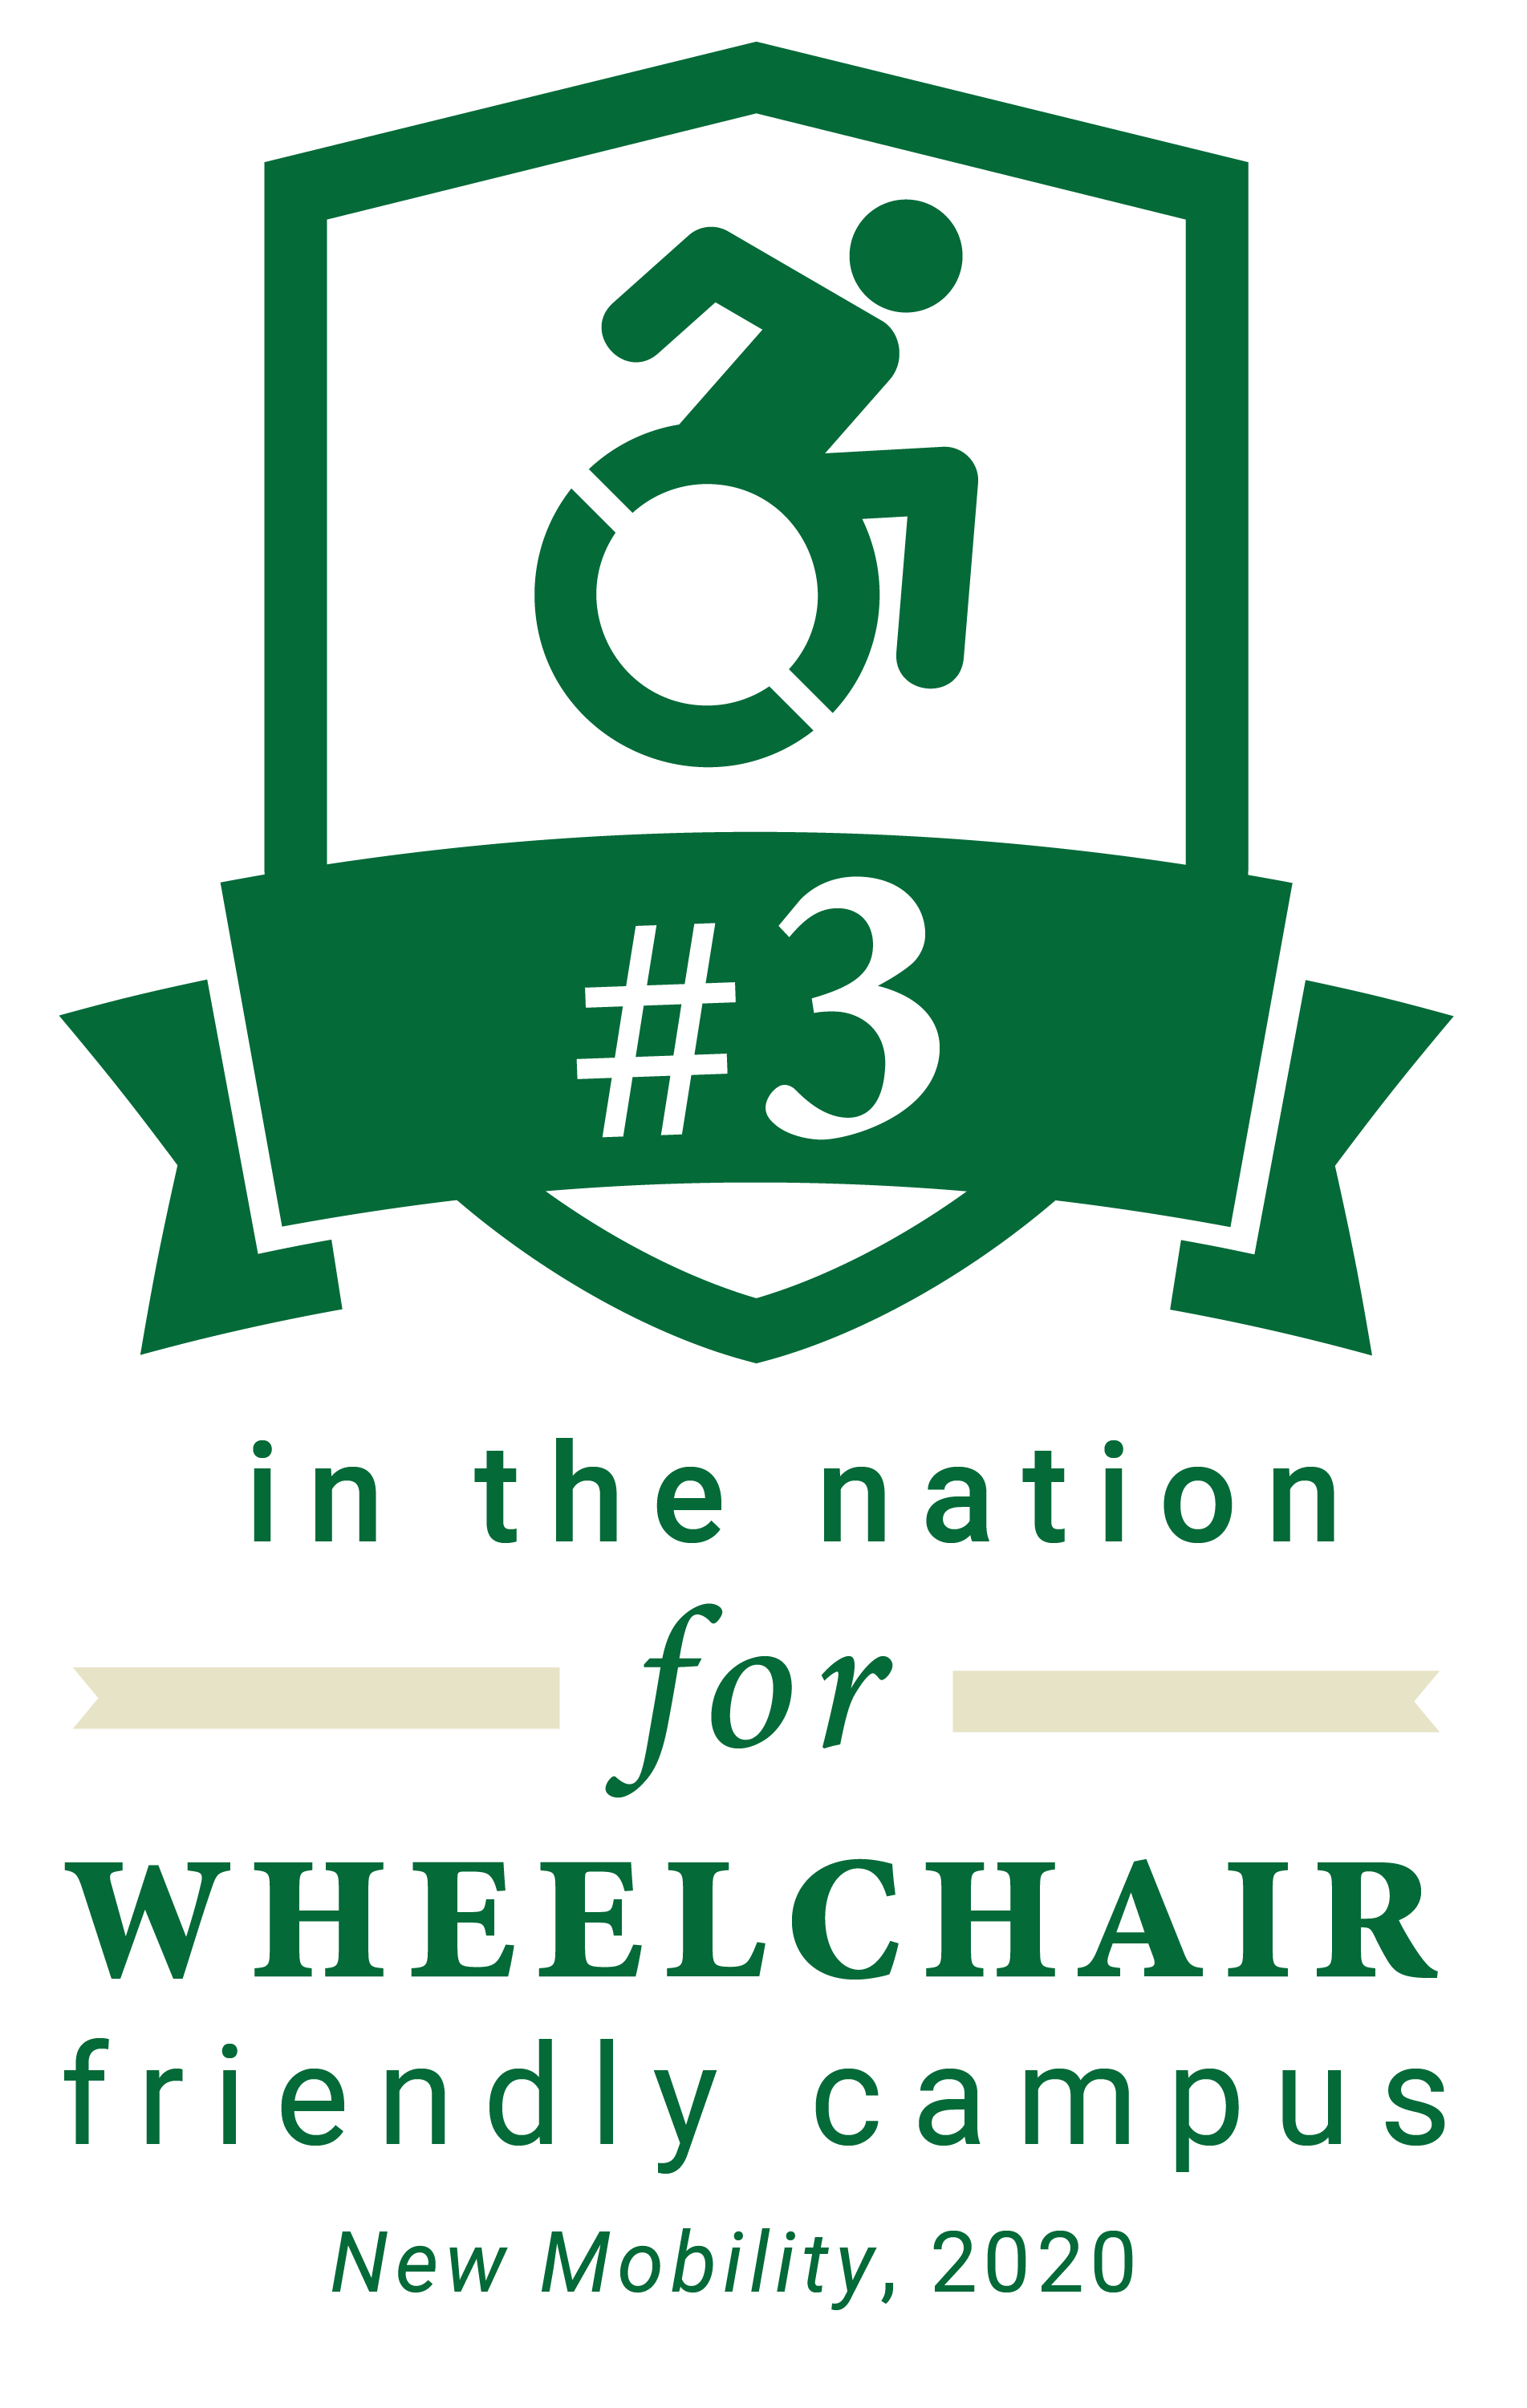 2020 New Mobility Third in the nation for wheelchair friendly campus